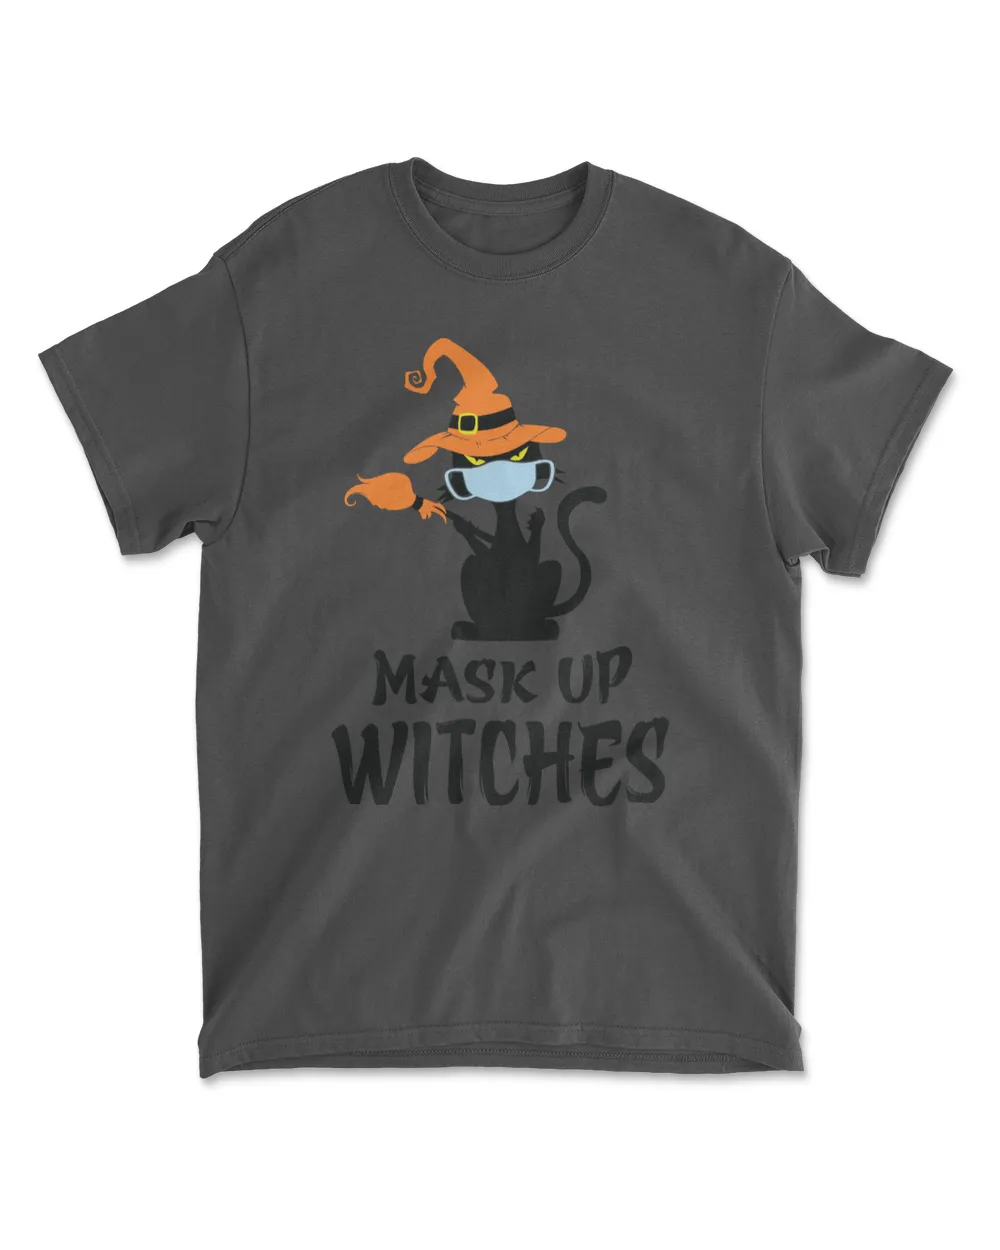 Mask Up Witches Funny CatHalloween T-Shirt